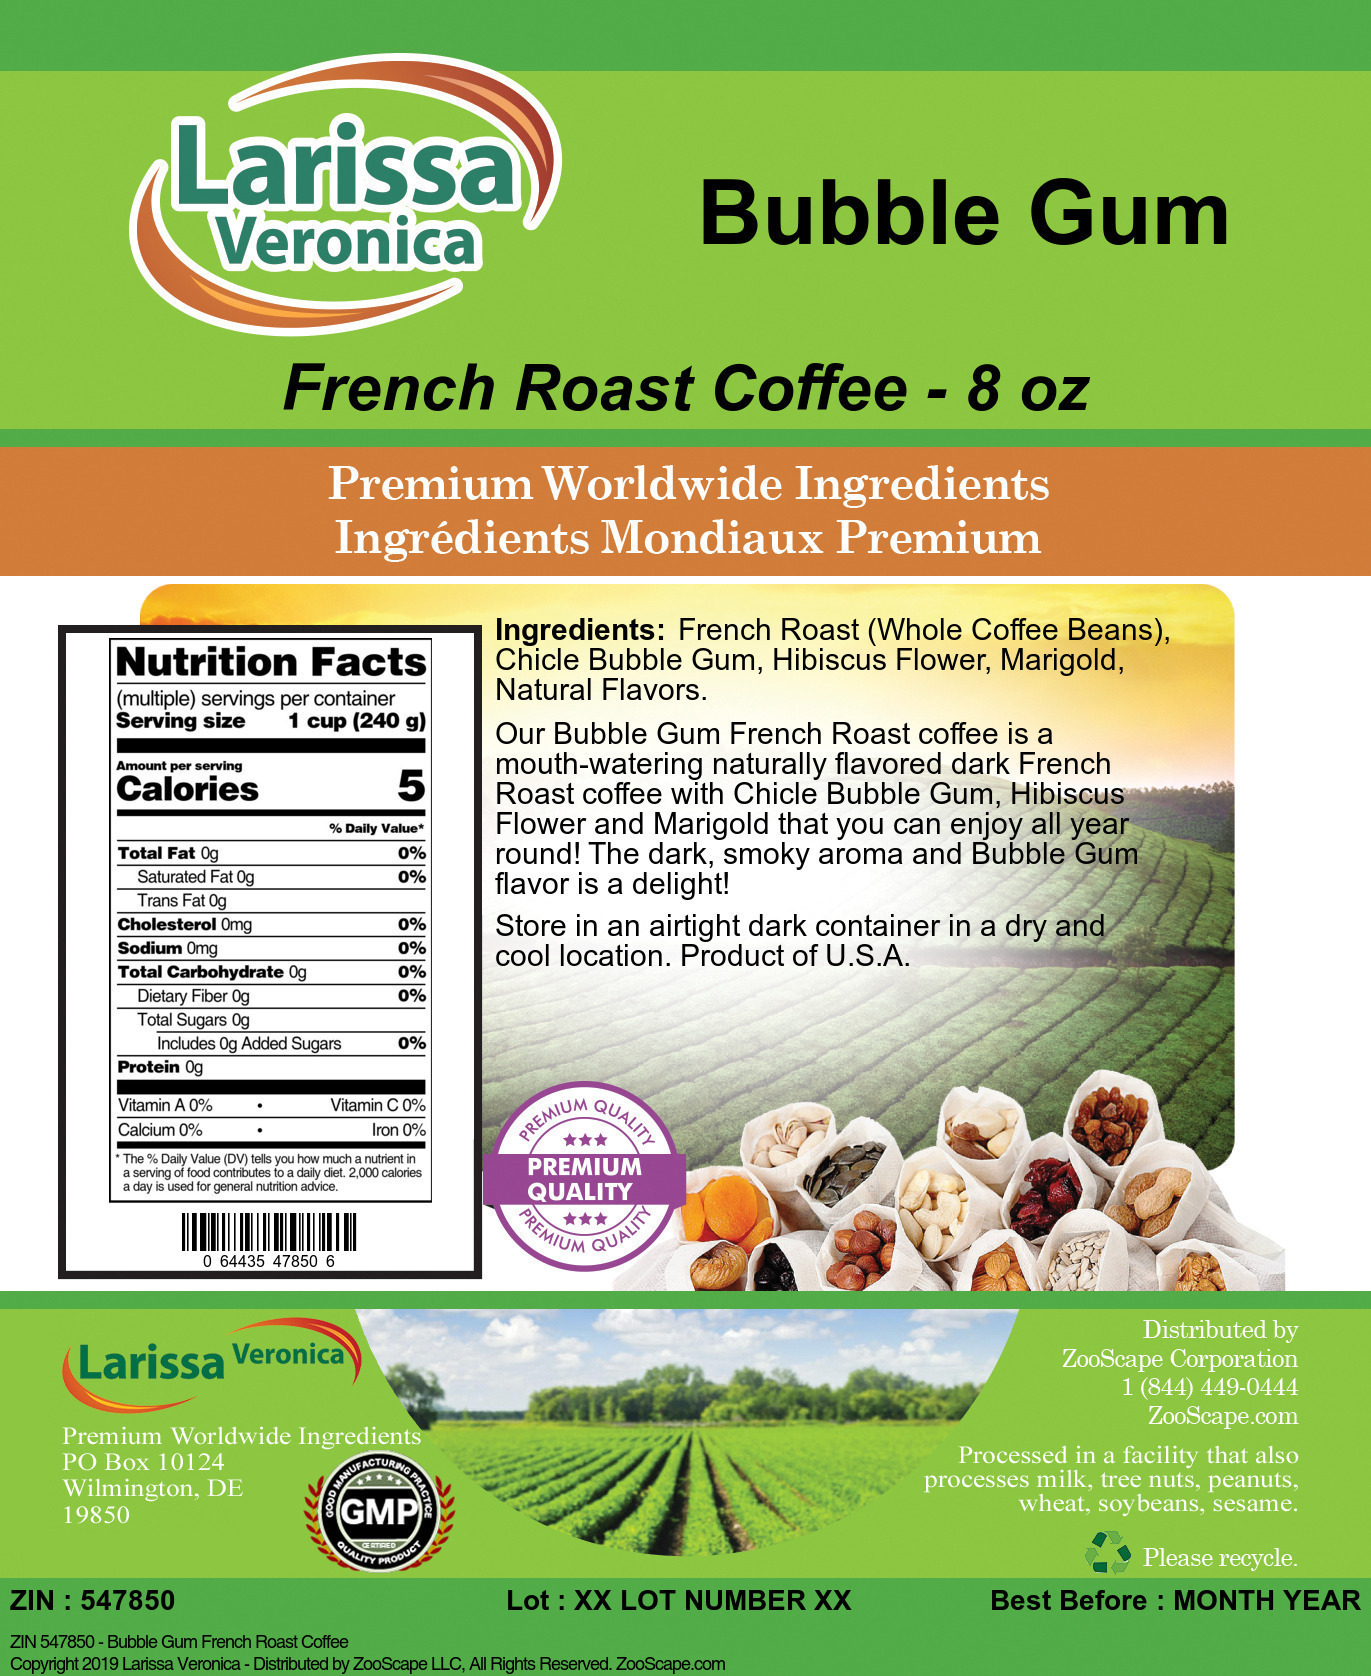 Bubble Gum French Roast Coffee - Label